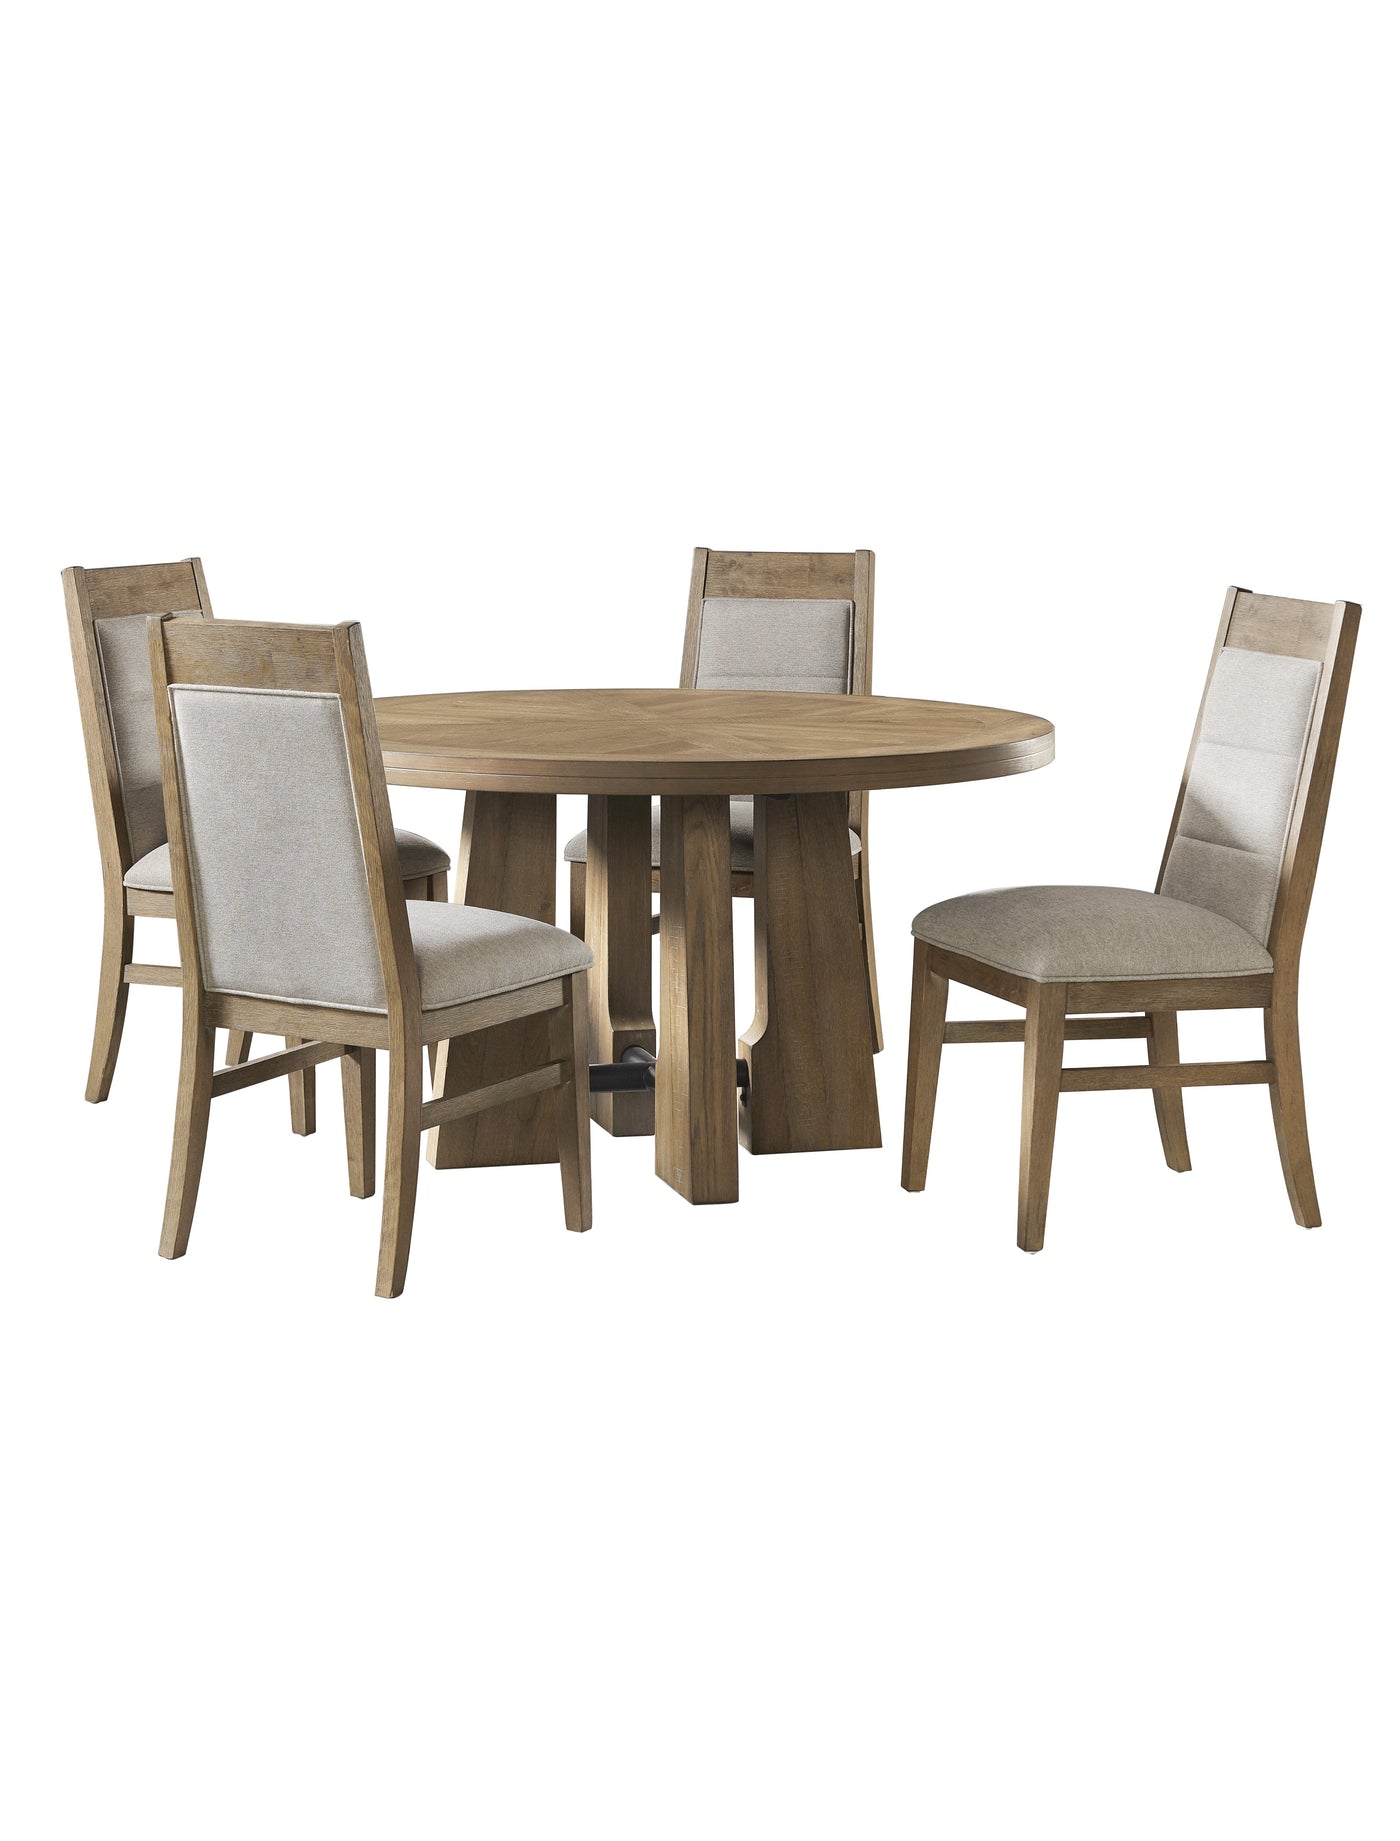 Landmark 5-Piece Round Dining Set with Upholstered Dining Chairs - Brown, Beige